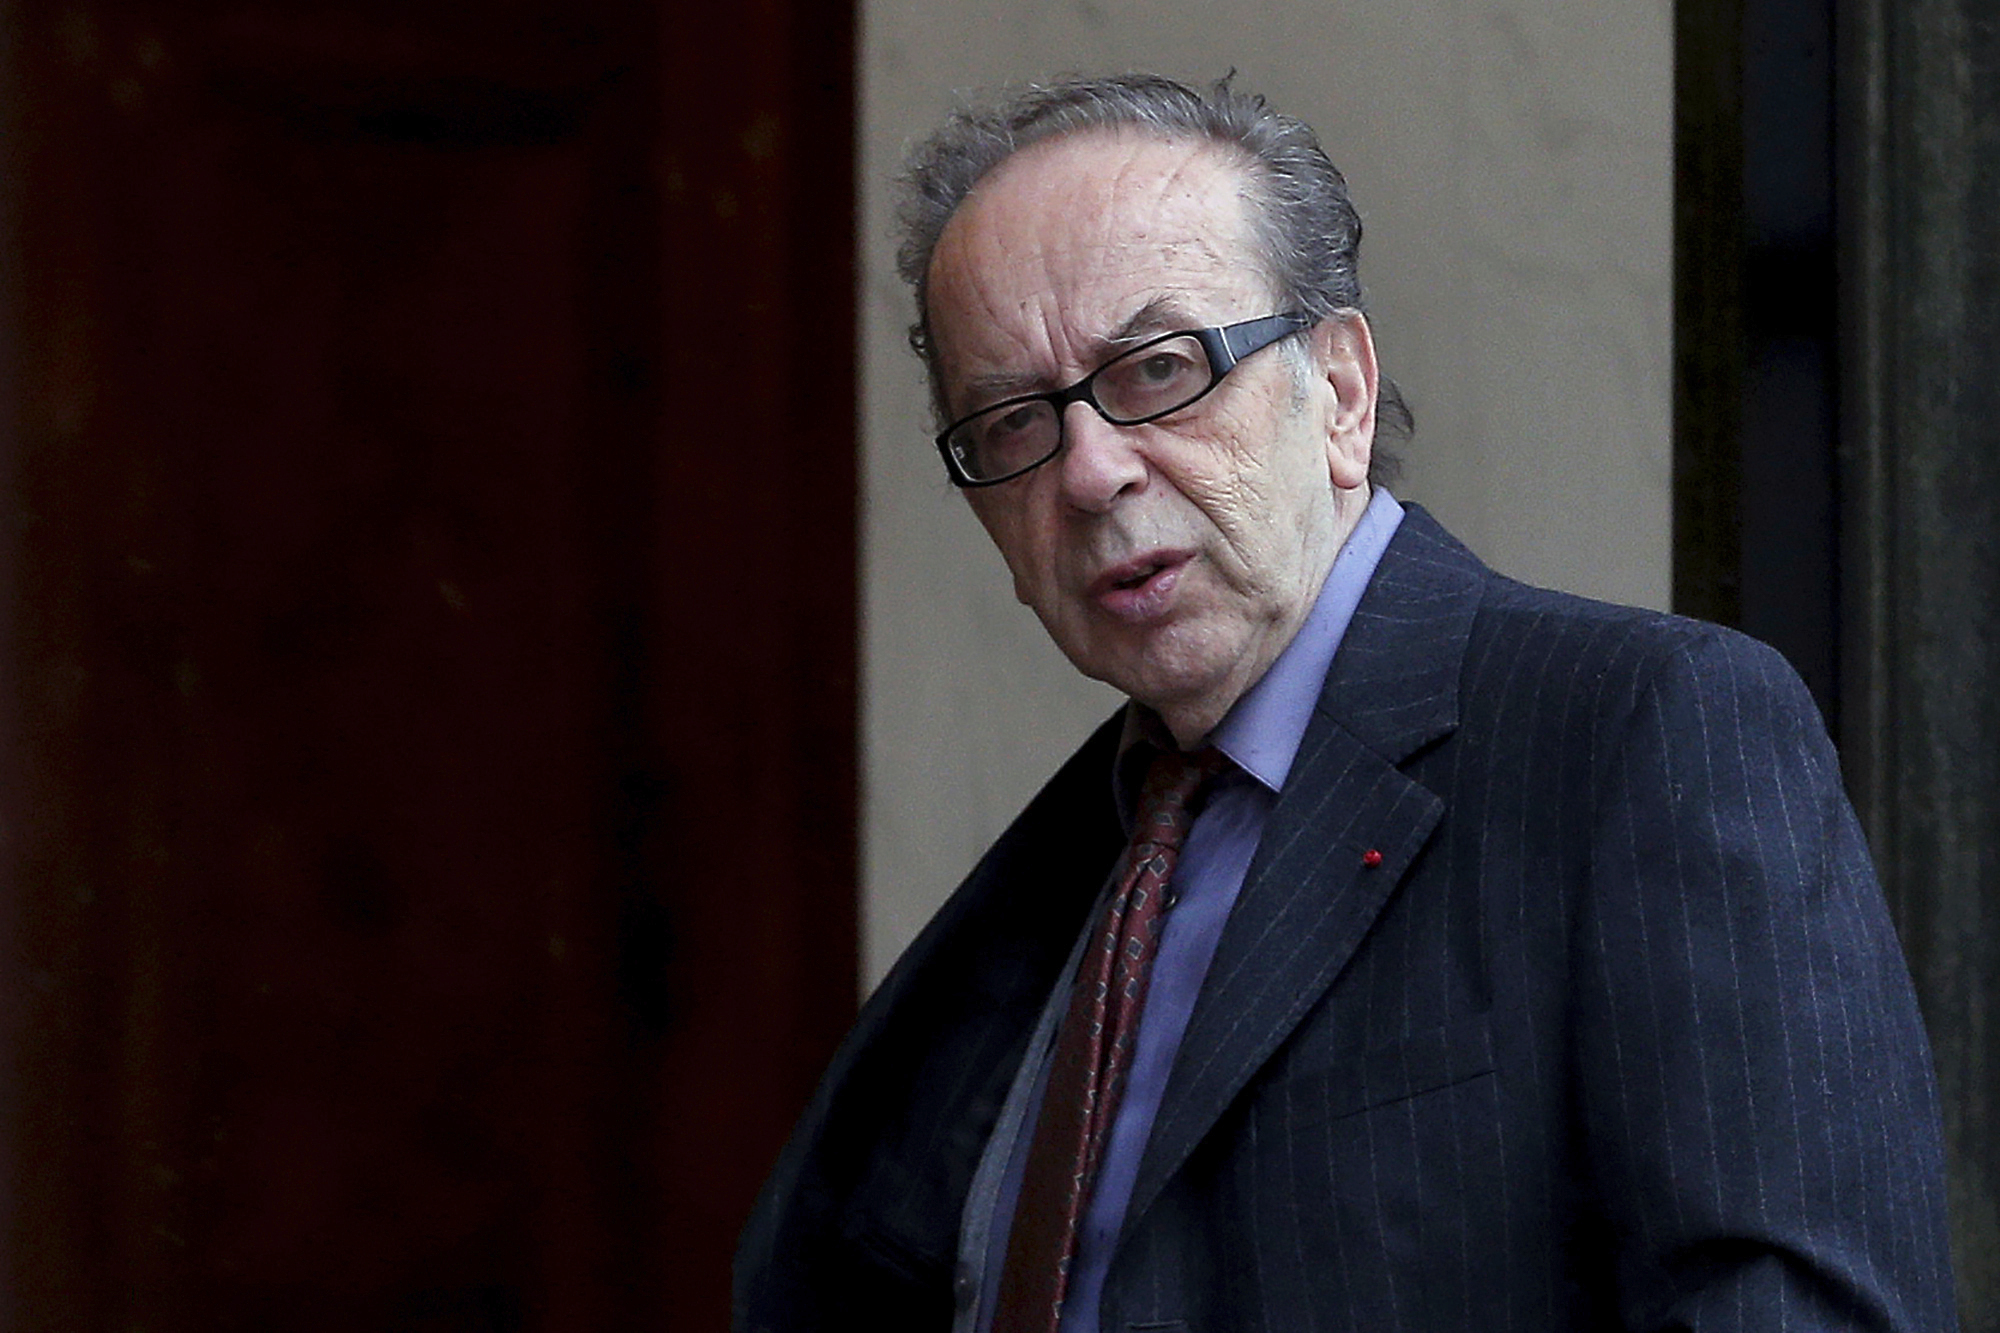 FILE - Albanian novelist Ismail Kadare arrives at the Elysee Palace to receive the France's Legion d'Honneur medal by French President Francois Hollande, in Paris, on May 30, 2016. Renowned Albanian novelist Kadare has died after being rushed to a hospital in the Albanian capital, his publishing editor said on Monday. He was 88. (AP Photo/Thibault Camus, File)